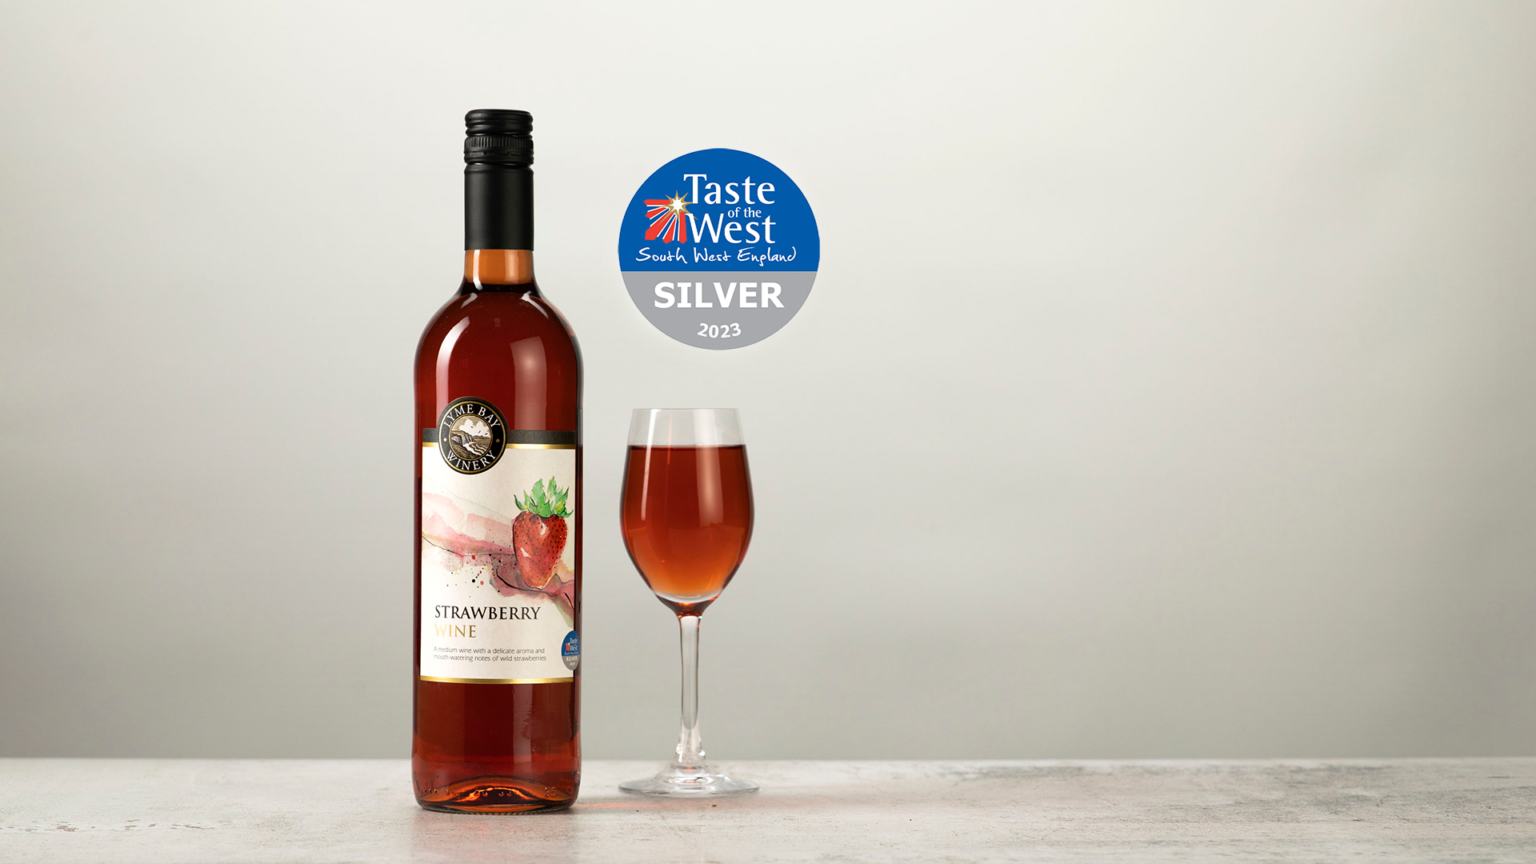 Strawberry wine image with TOTW silver badge